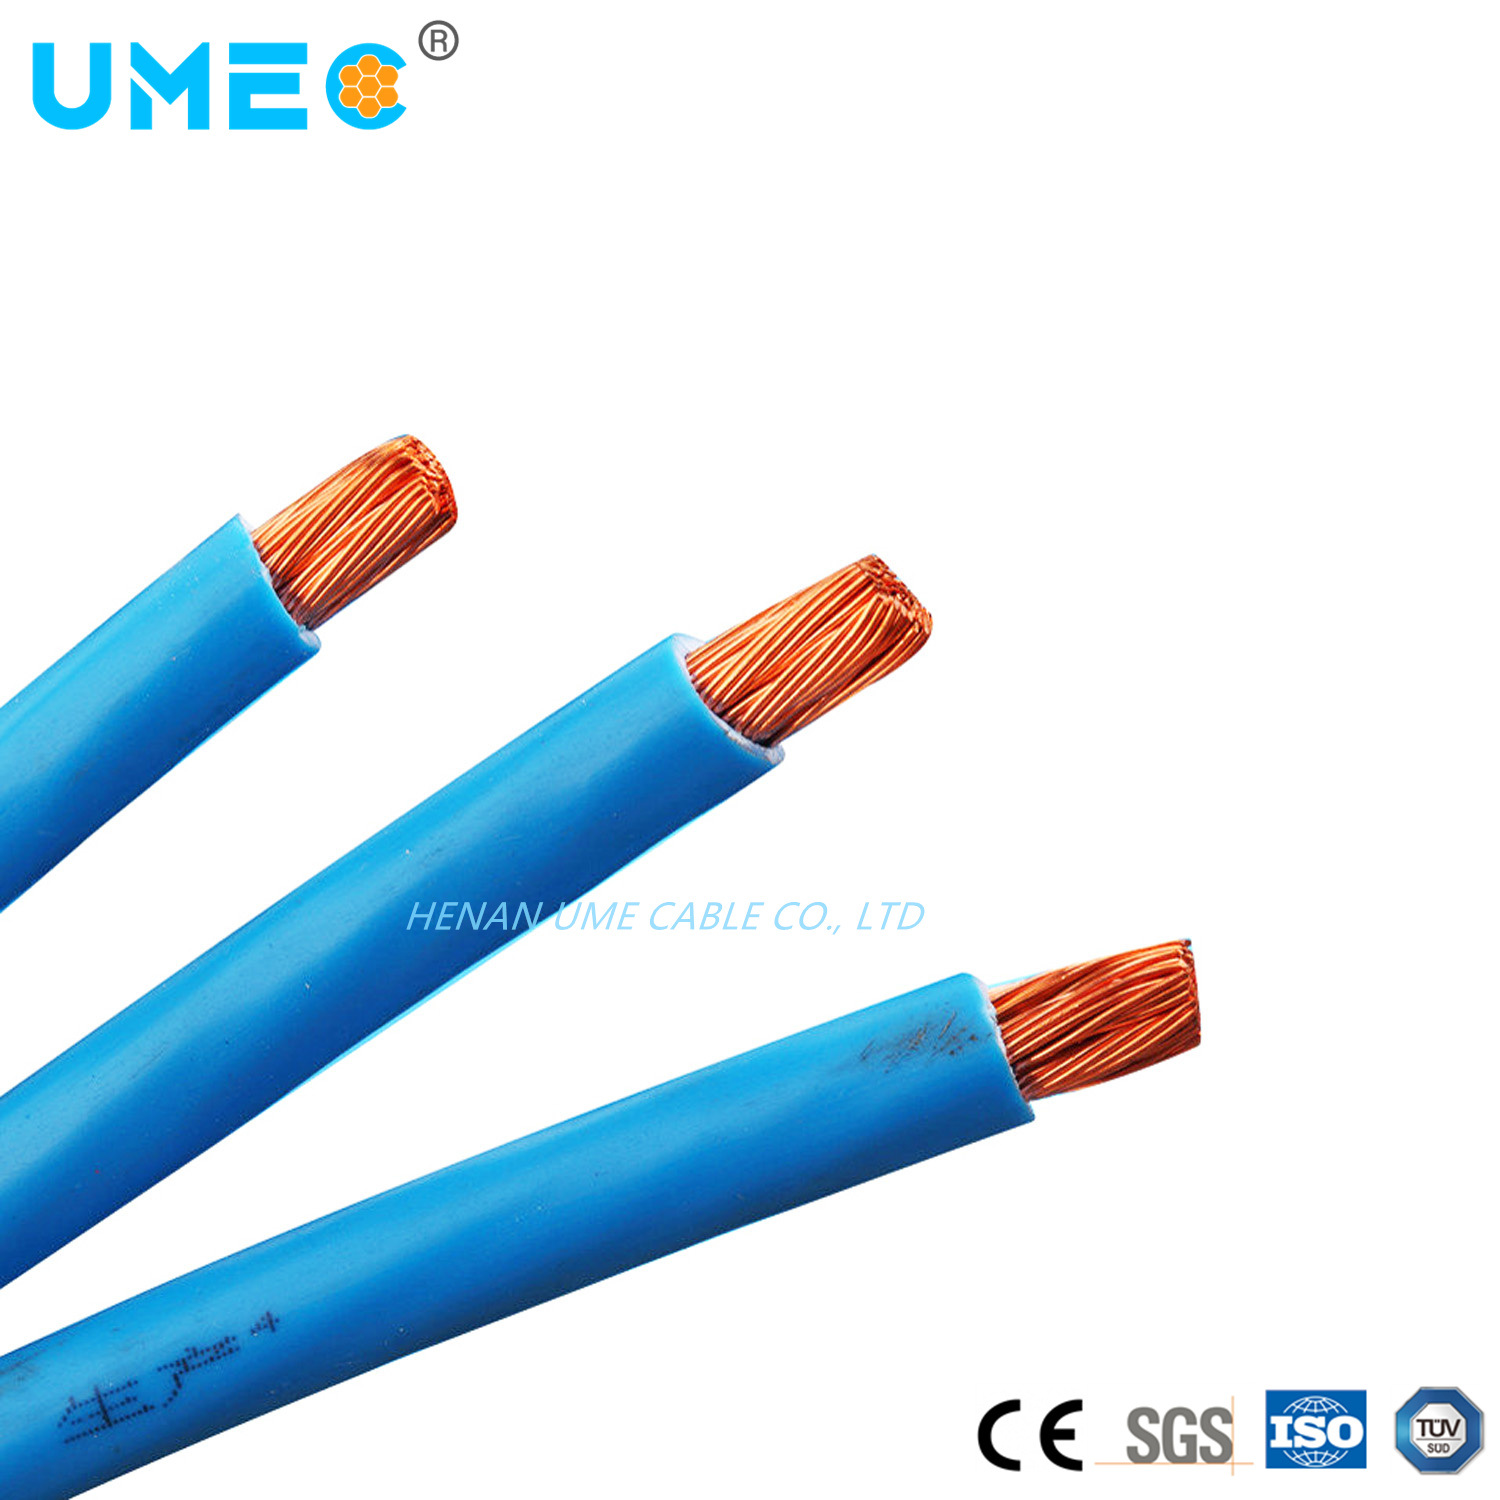 Manufacturers Supply 4mm 6mm 10mm 16mm Single-Core Copper Wire Heat-Resistant Flexible Building Wires and Cables RV